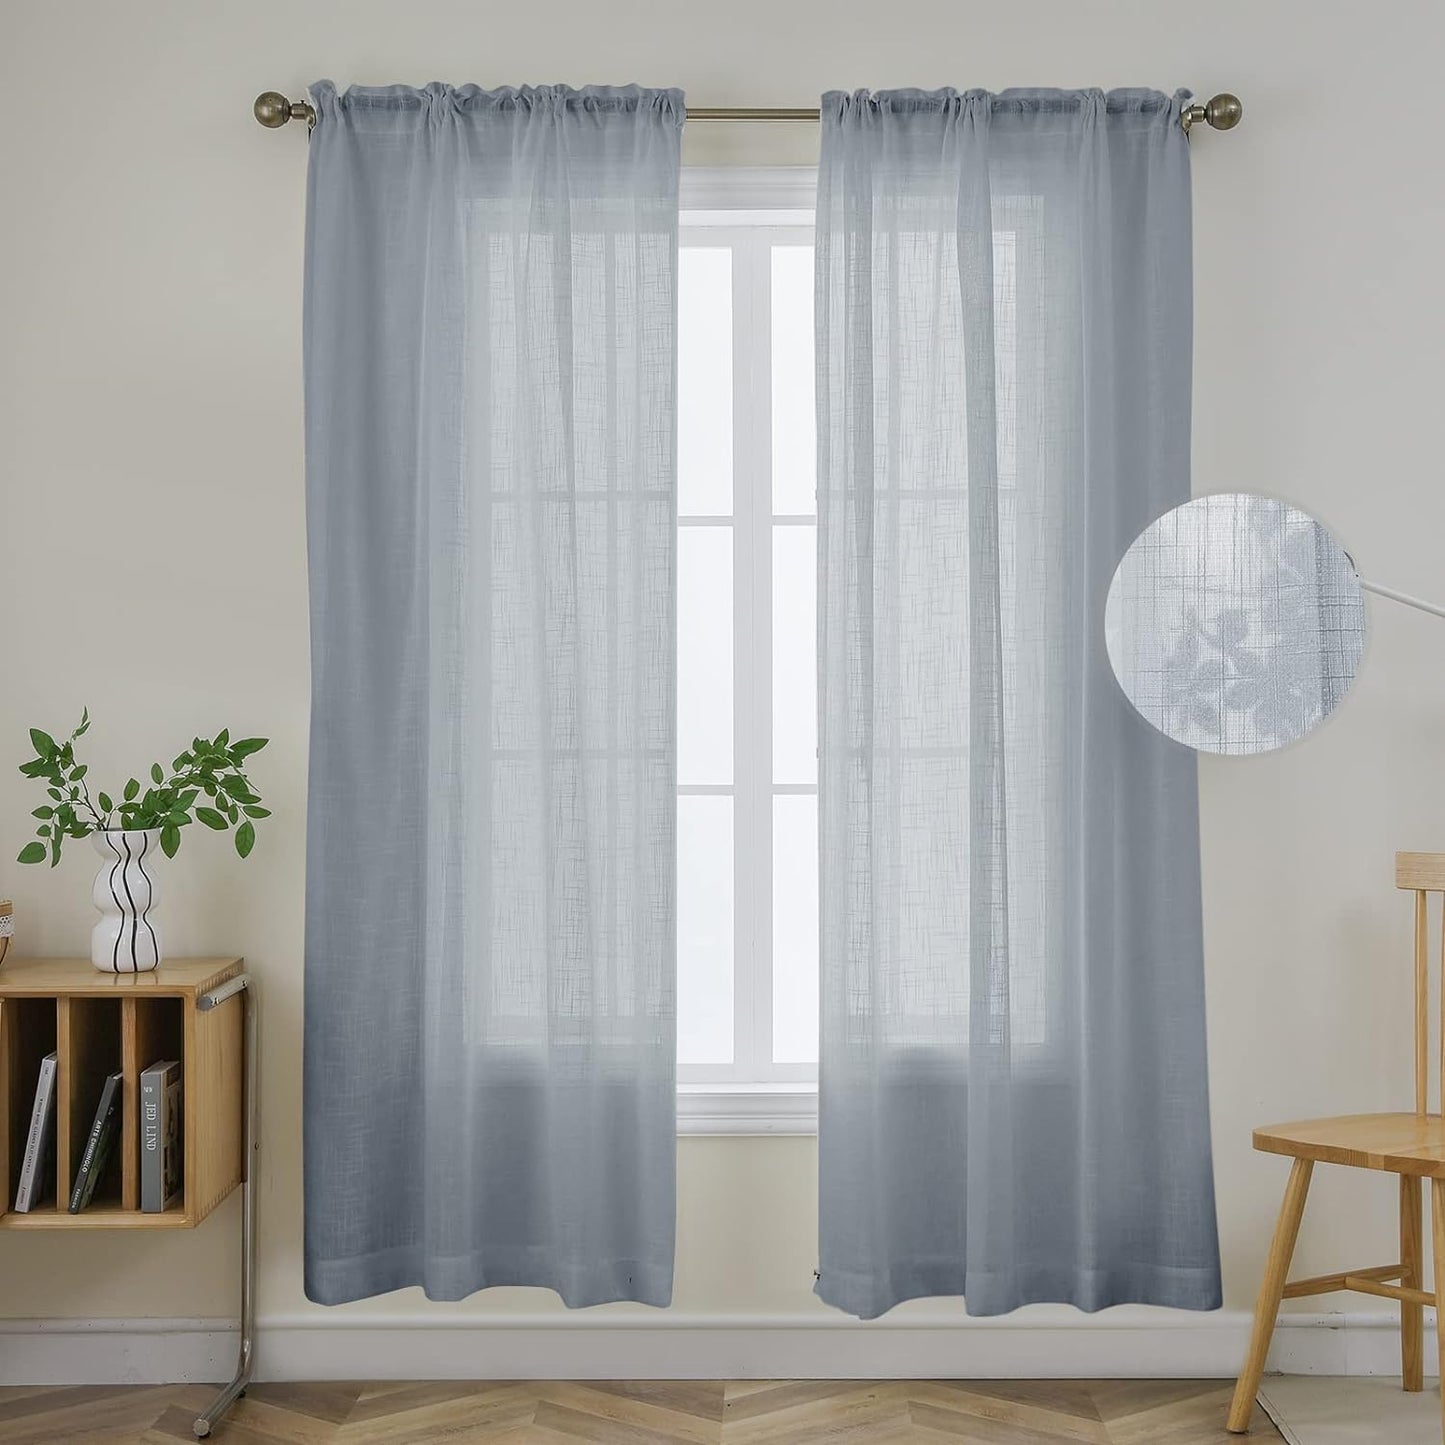 Joydeco White Sheer Curtains 63 Inch Length 2 Panels Set, Rod Pocket Long Sheer Curtains for Window Bedroom Living Room, Lightweight Semi Drape Panels for Yard Patio (54X63 Inch, off White)  Joydeco Floral Embroidery-Grey 54W X 72L Inch X 2 Panels 